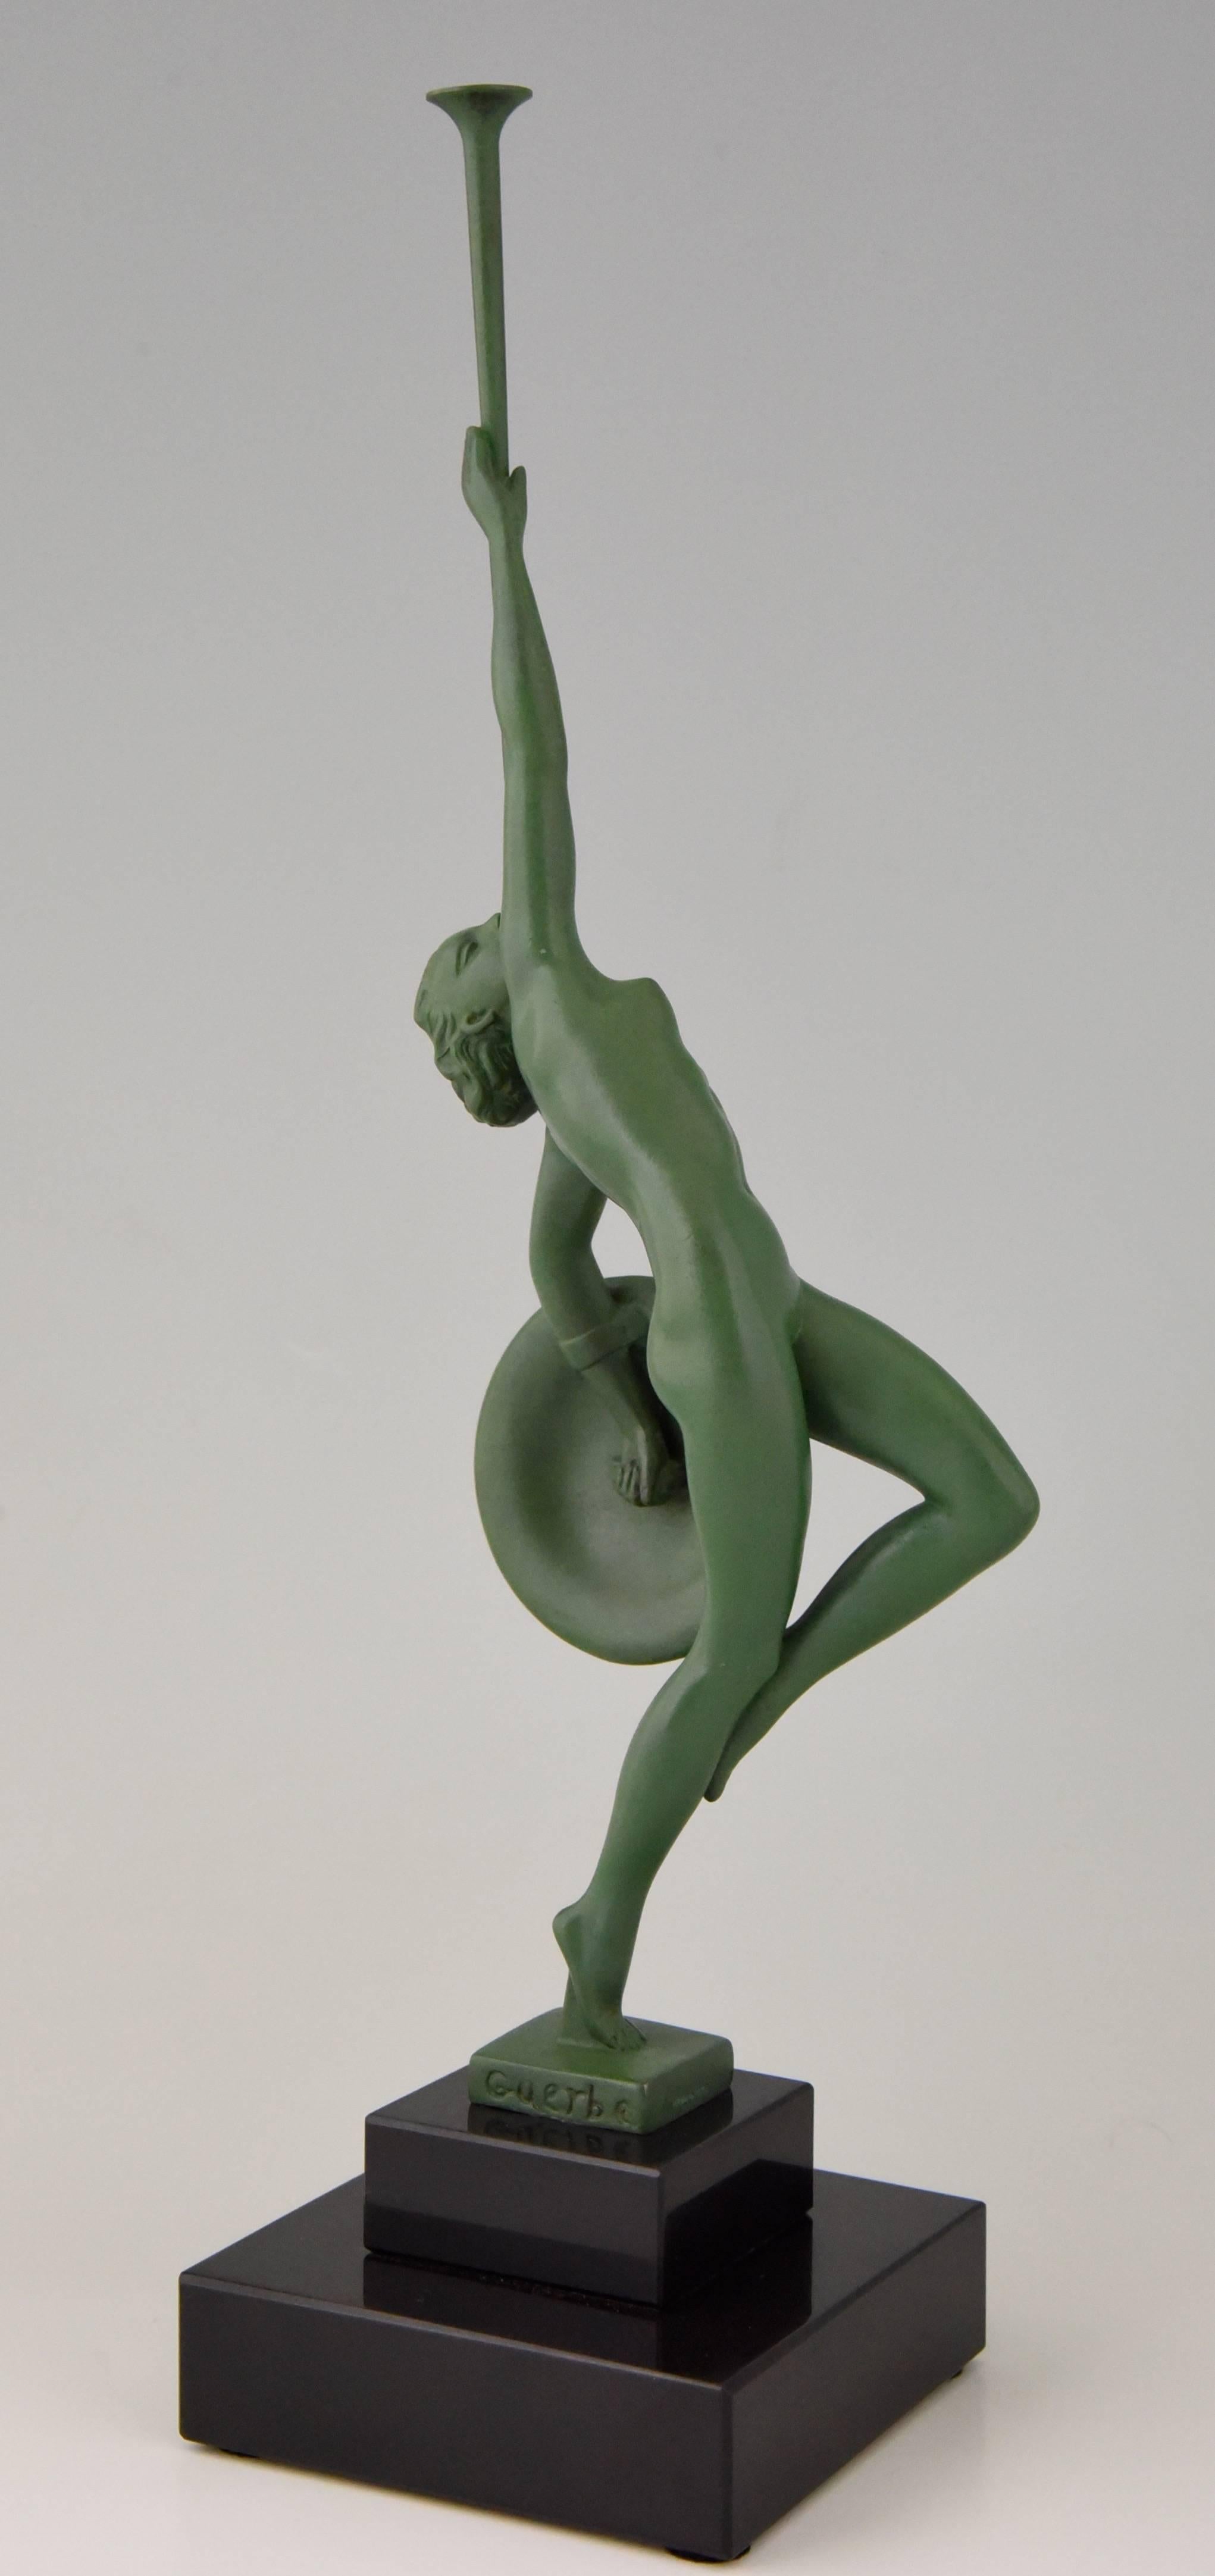 20th Century French Art Deco Sculpture Nude with Trumpet by Guerbe on Marble Base, 1930